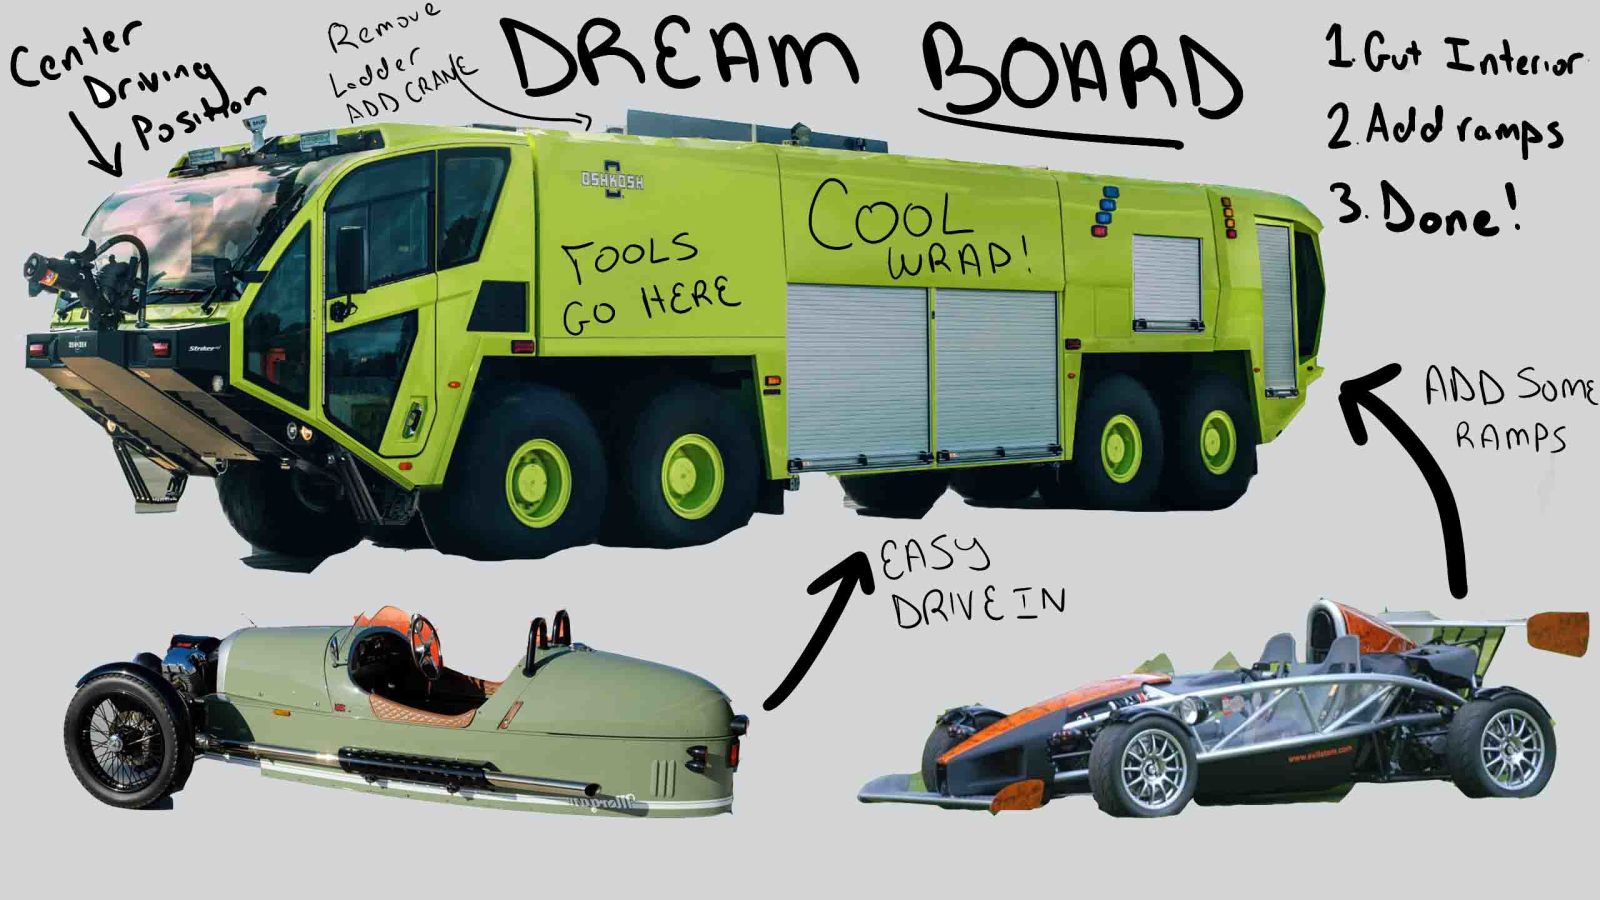 Illustration for article titled Ive created a dream board. It mostly speaks for itself.